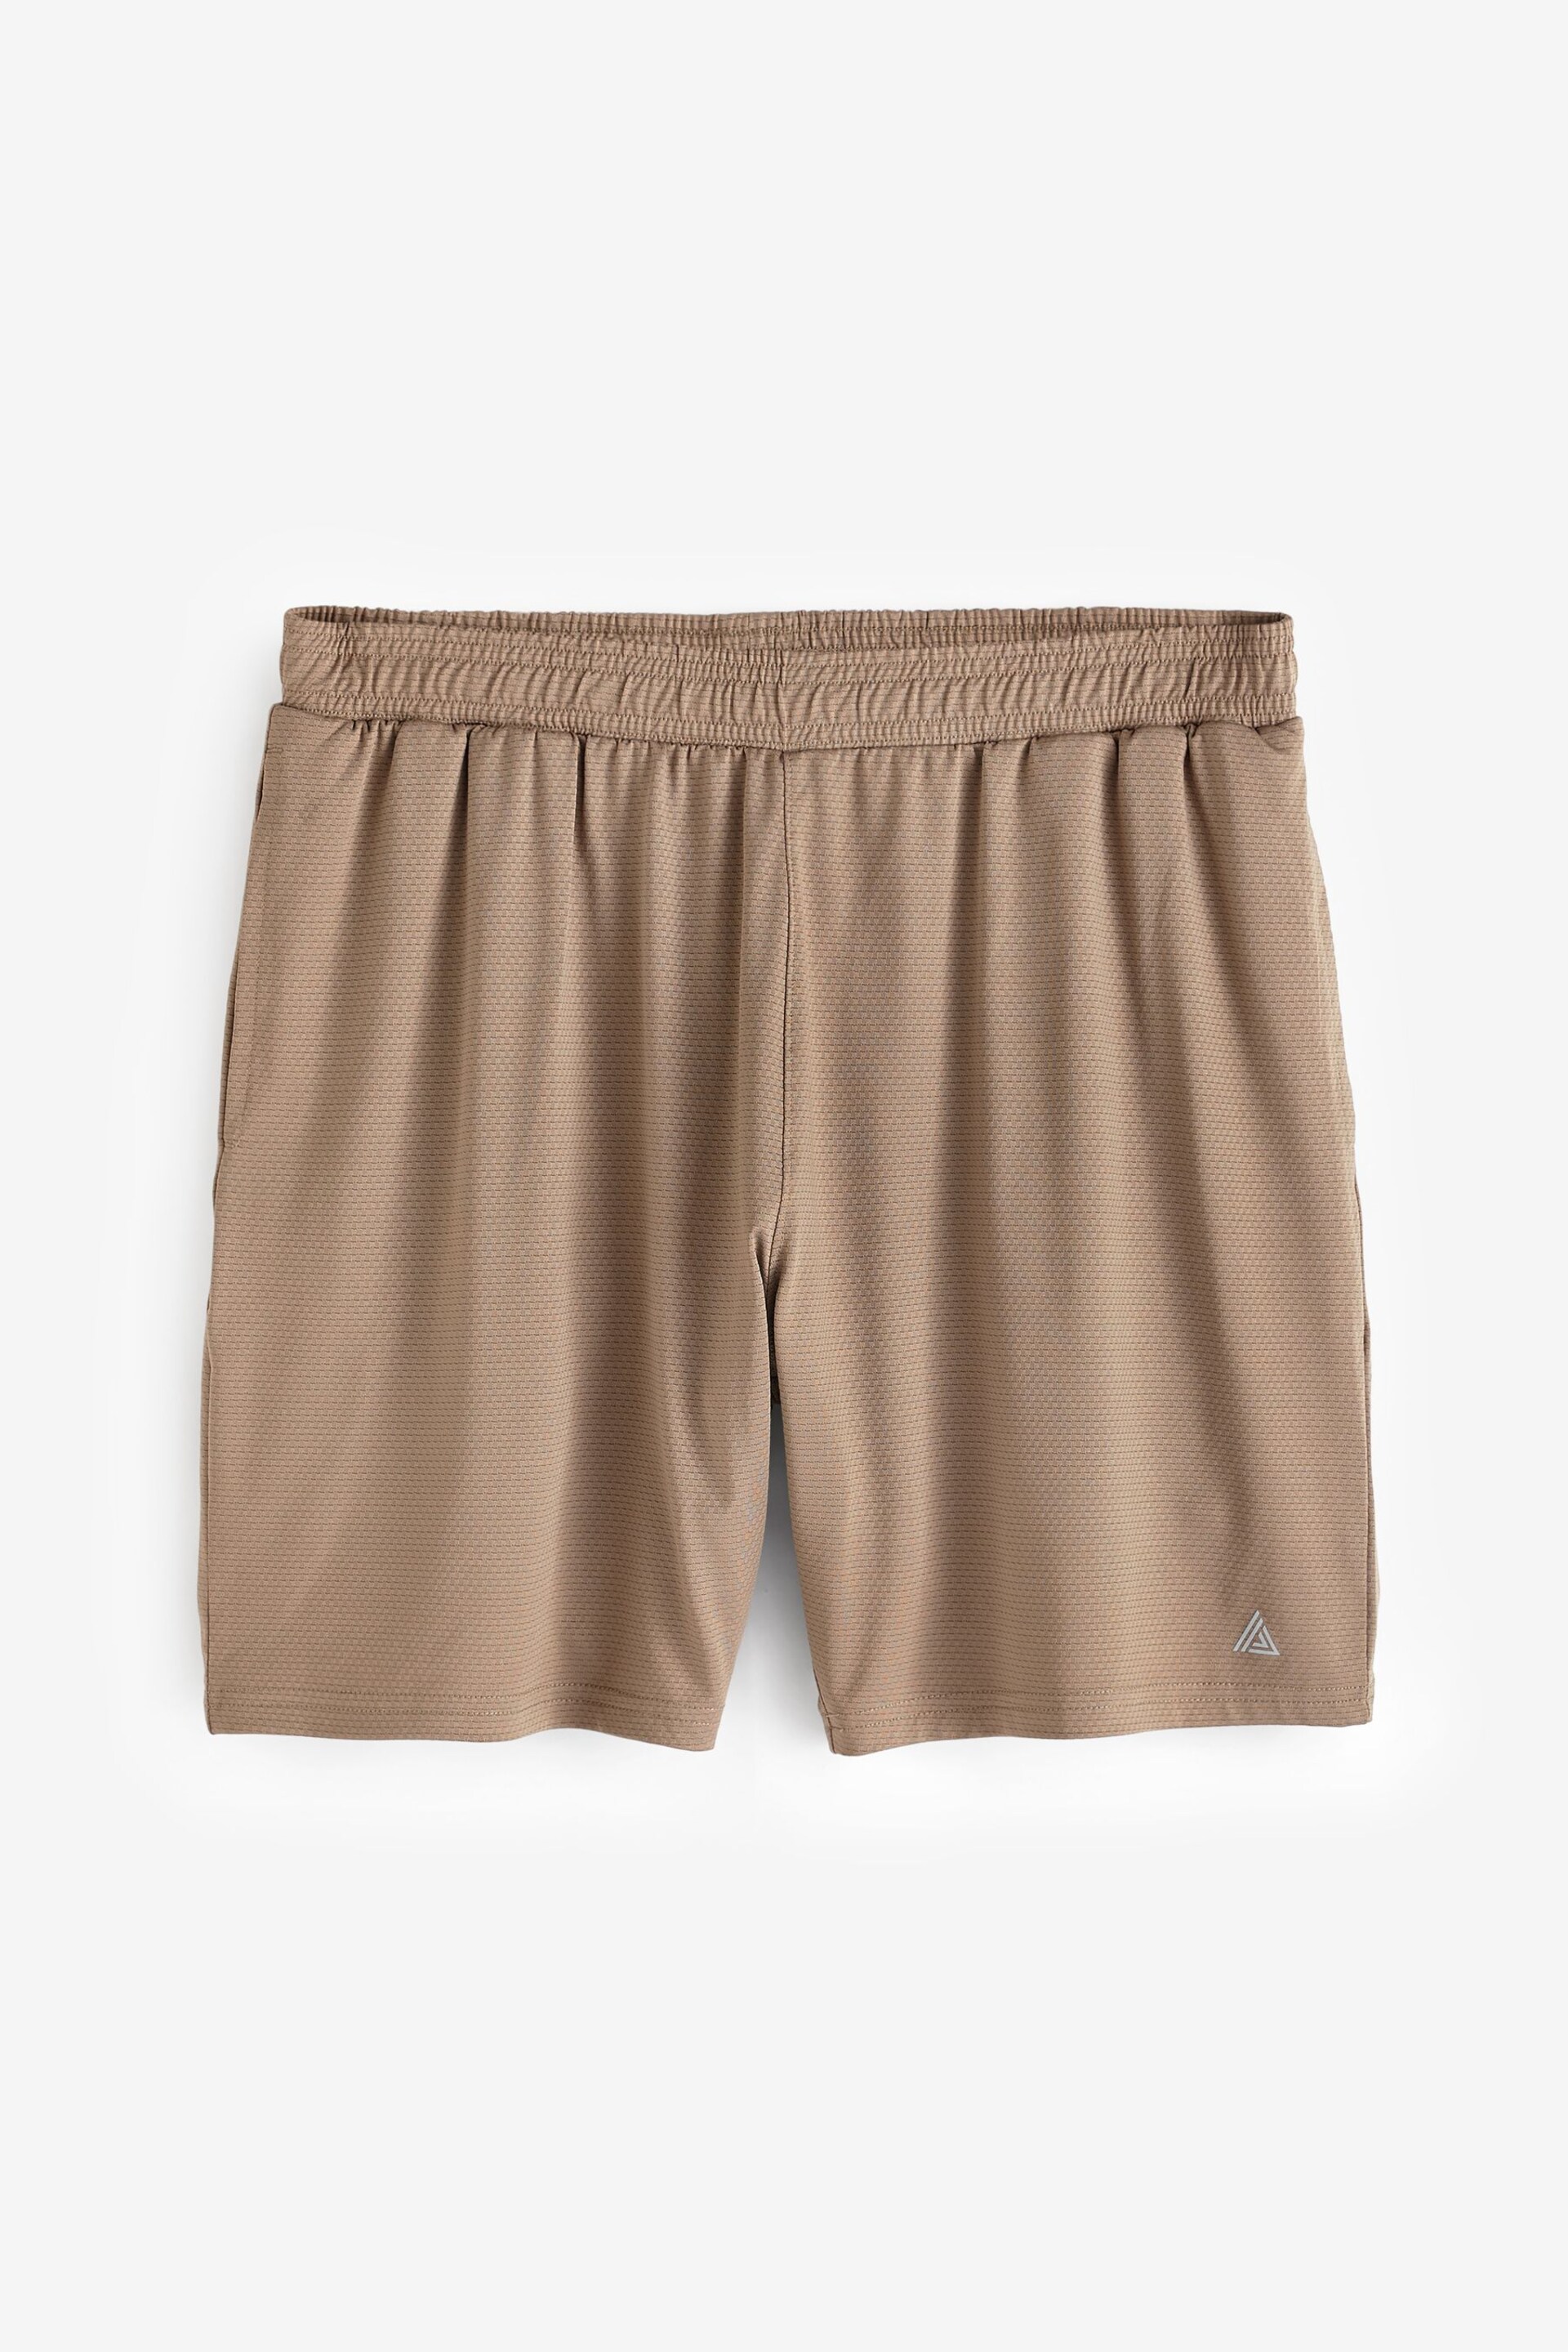 Stone Textured Active Shorts - Image 6 of 11